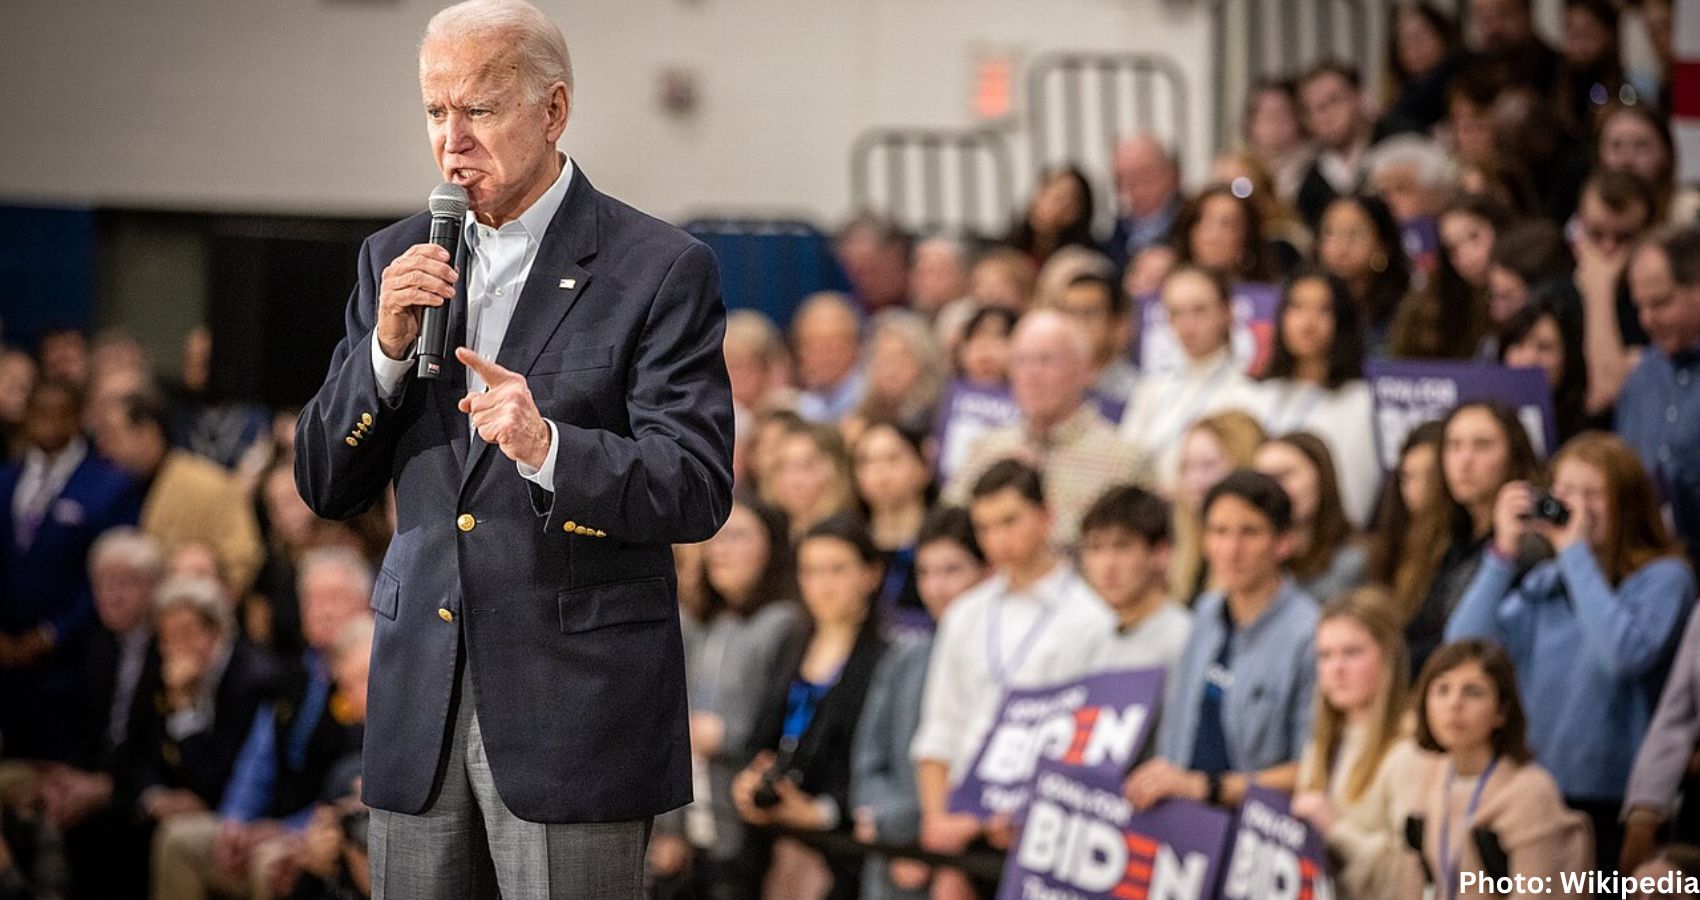 Biden Faces Mounting Pressure to Abandon 2024 Reelection Bid Amid Isolation and Internal Dissent